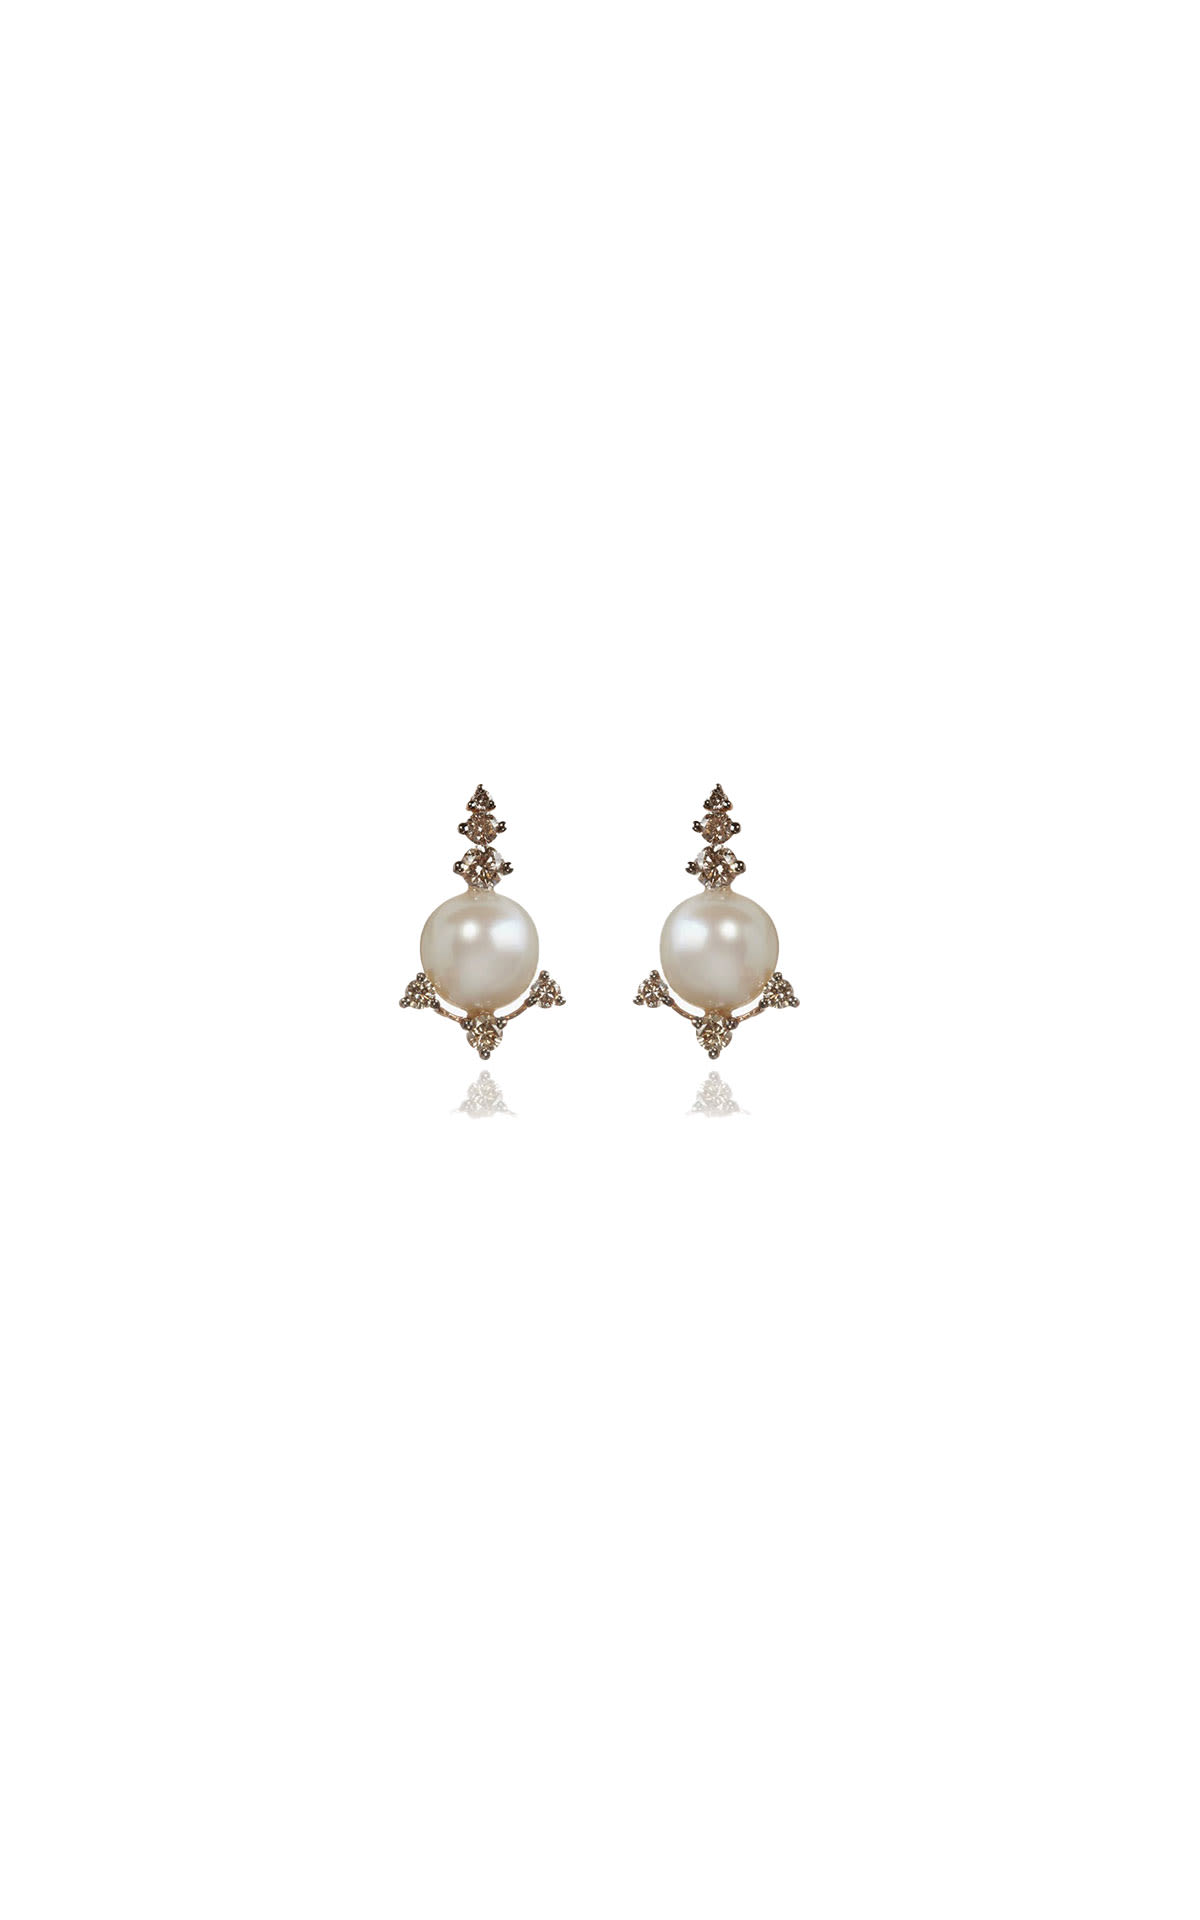 Annoushka 18ct rose gold diamond and pearl studs from Bicester Village